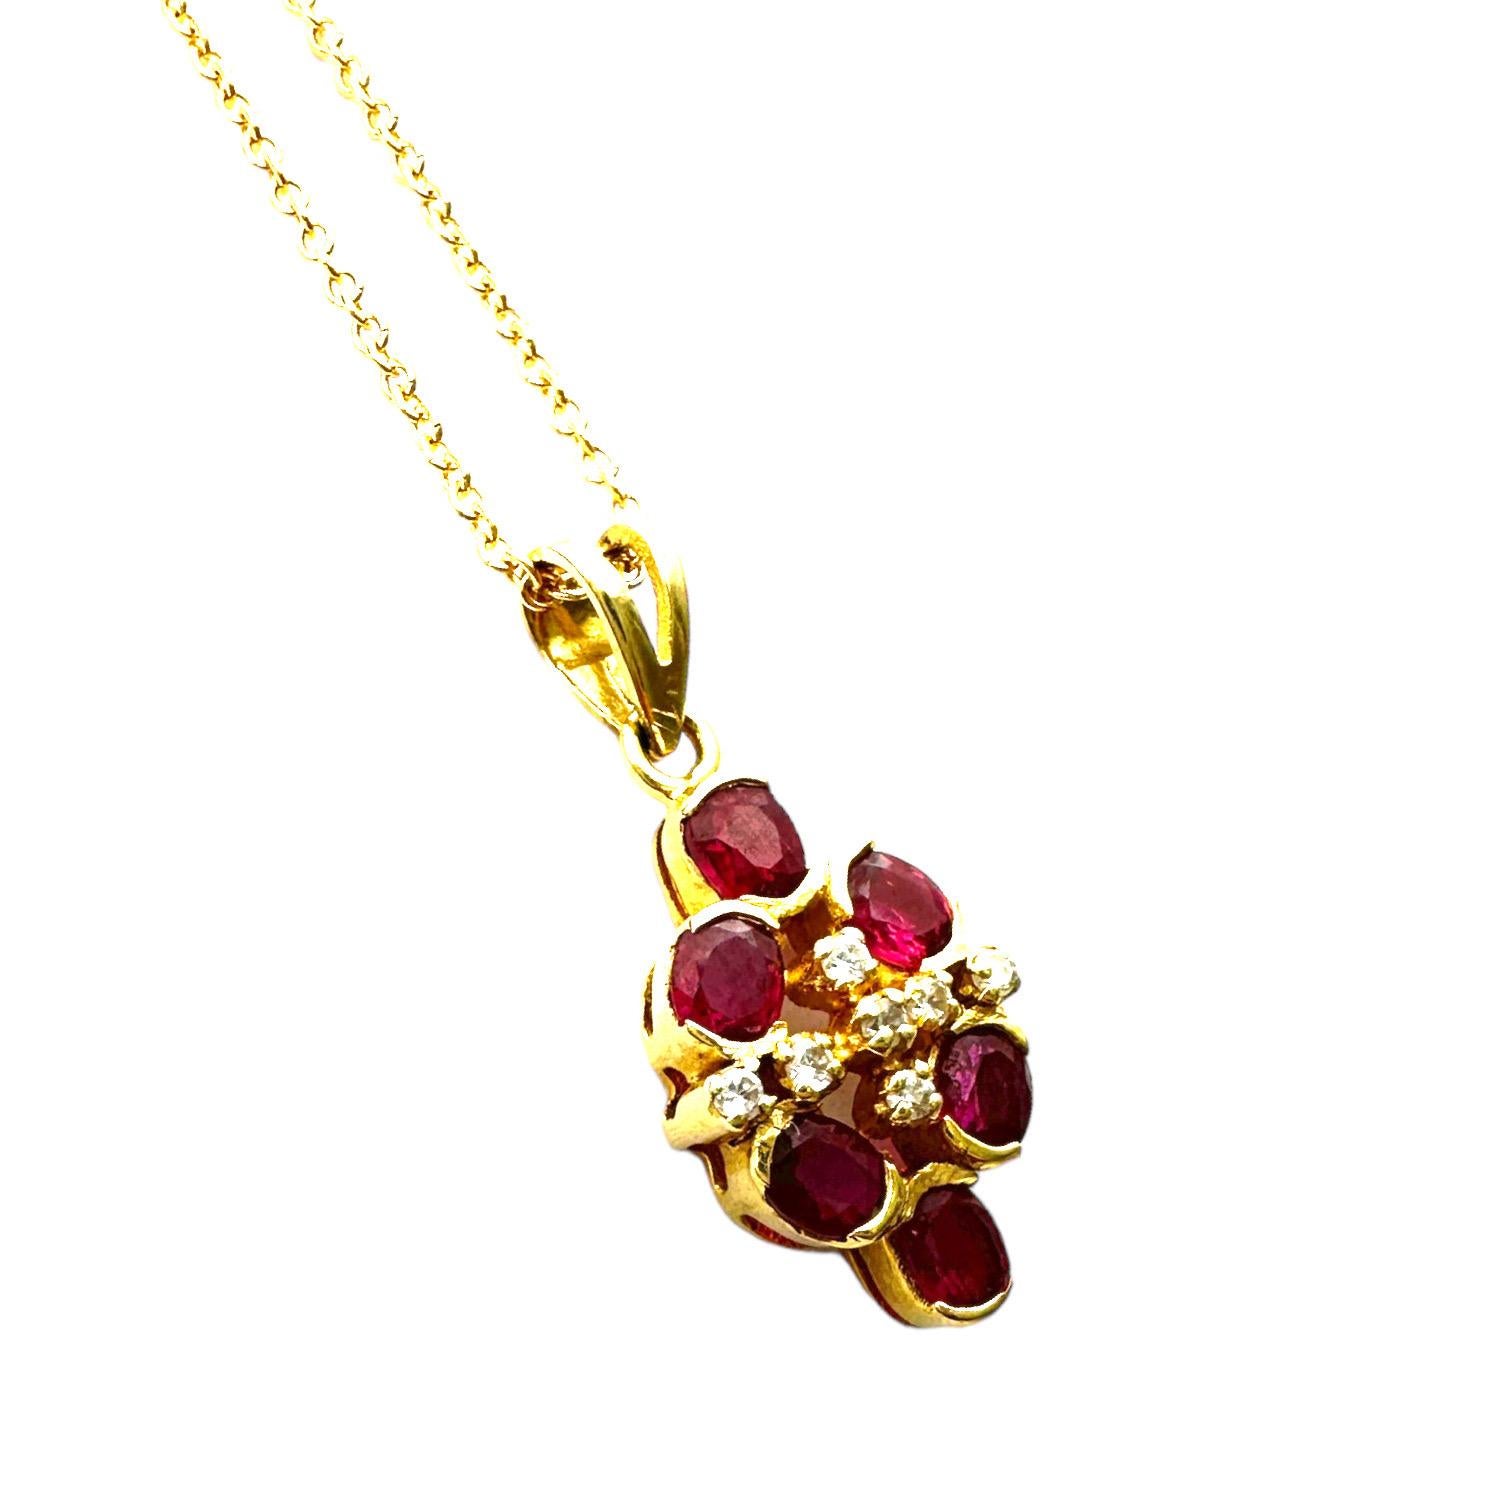 This 14 Karat yellow gold pendant features a stunning cluster of .75CTW oval-cut ruby and diamond stones. With its exquisite craftsmanship and luxurious design, this piece is the ideal accessory for any jewelry collection.

14 Karat yellow gold